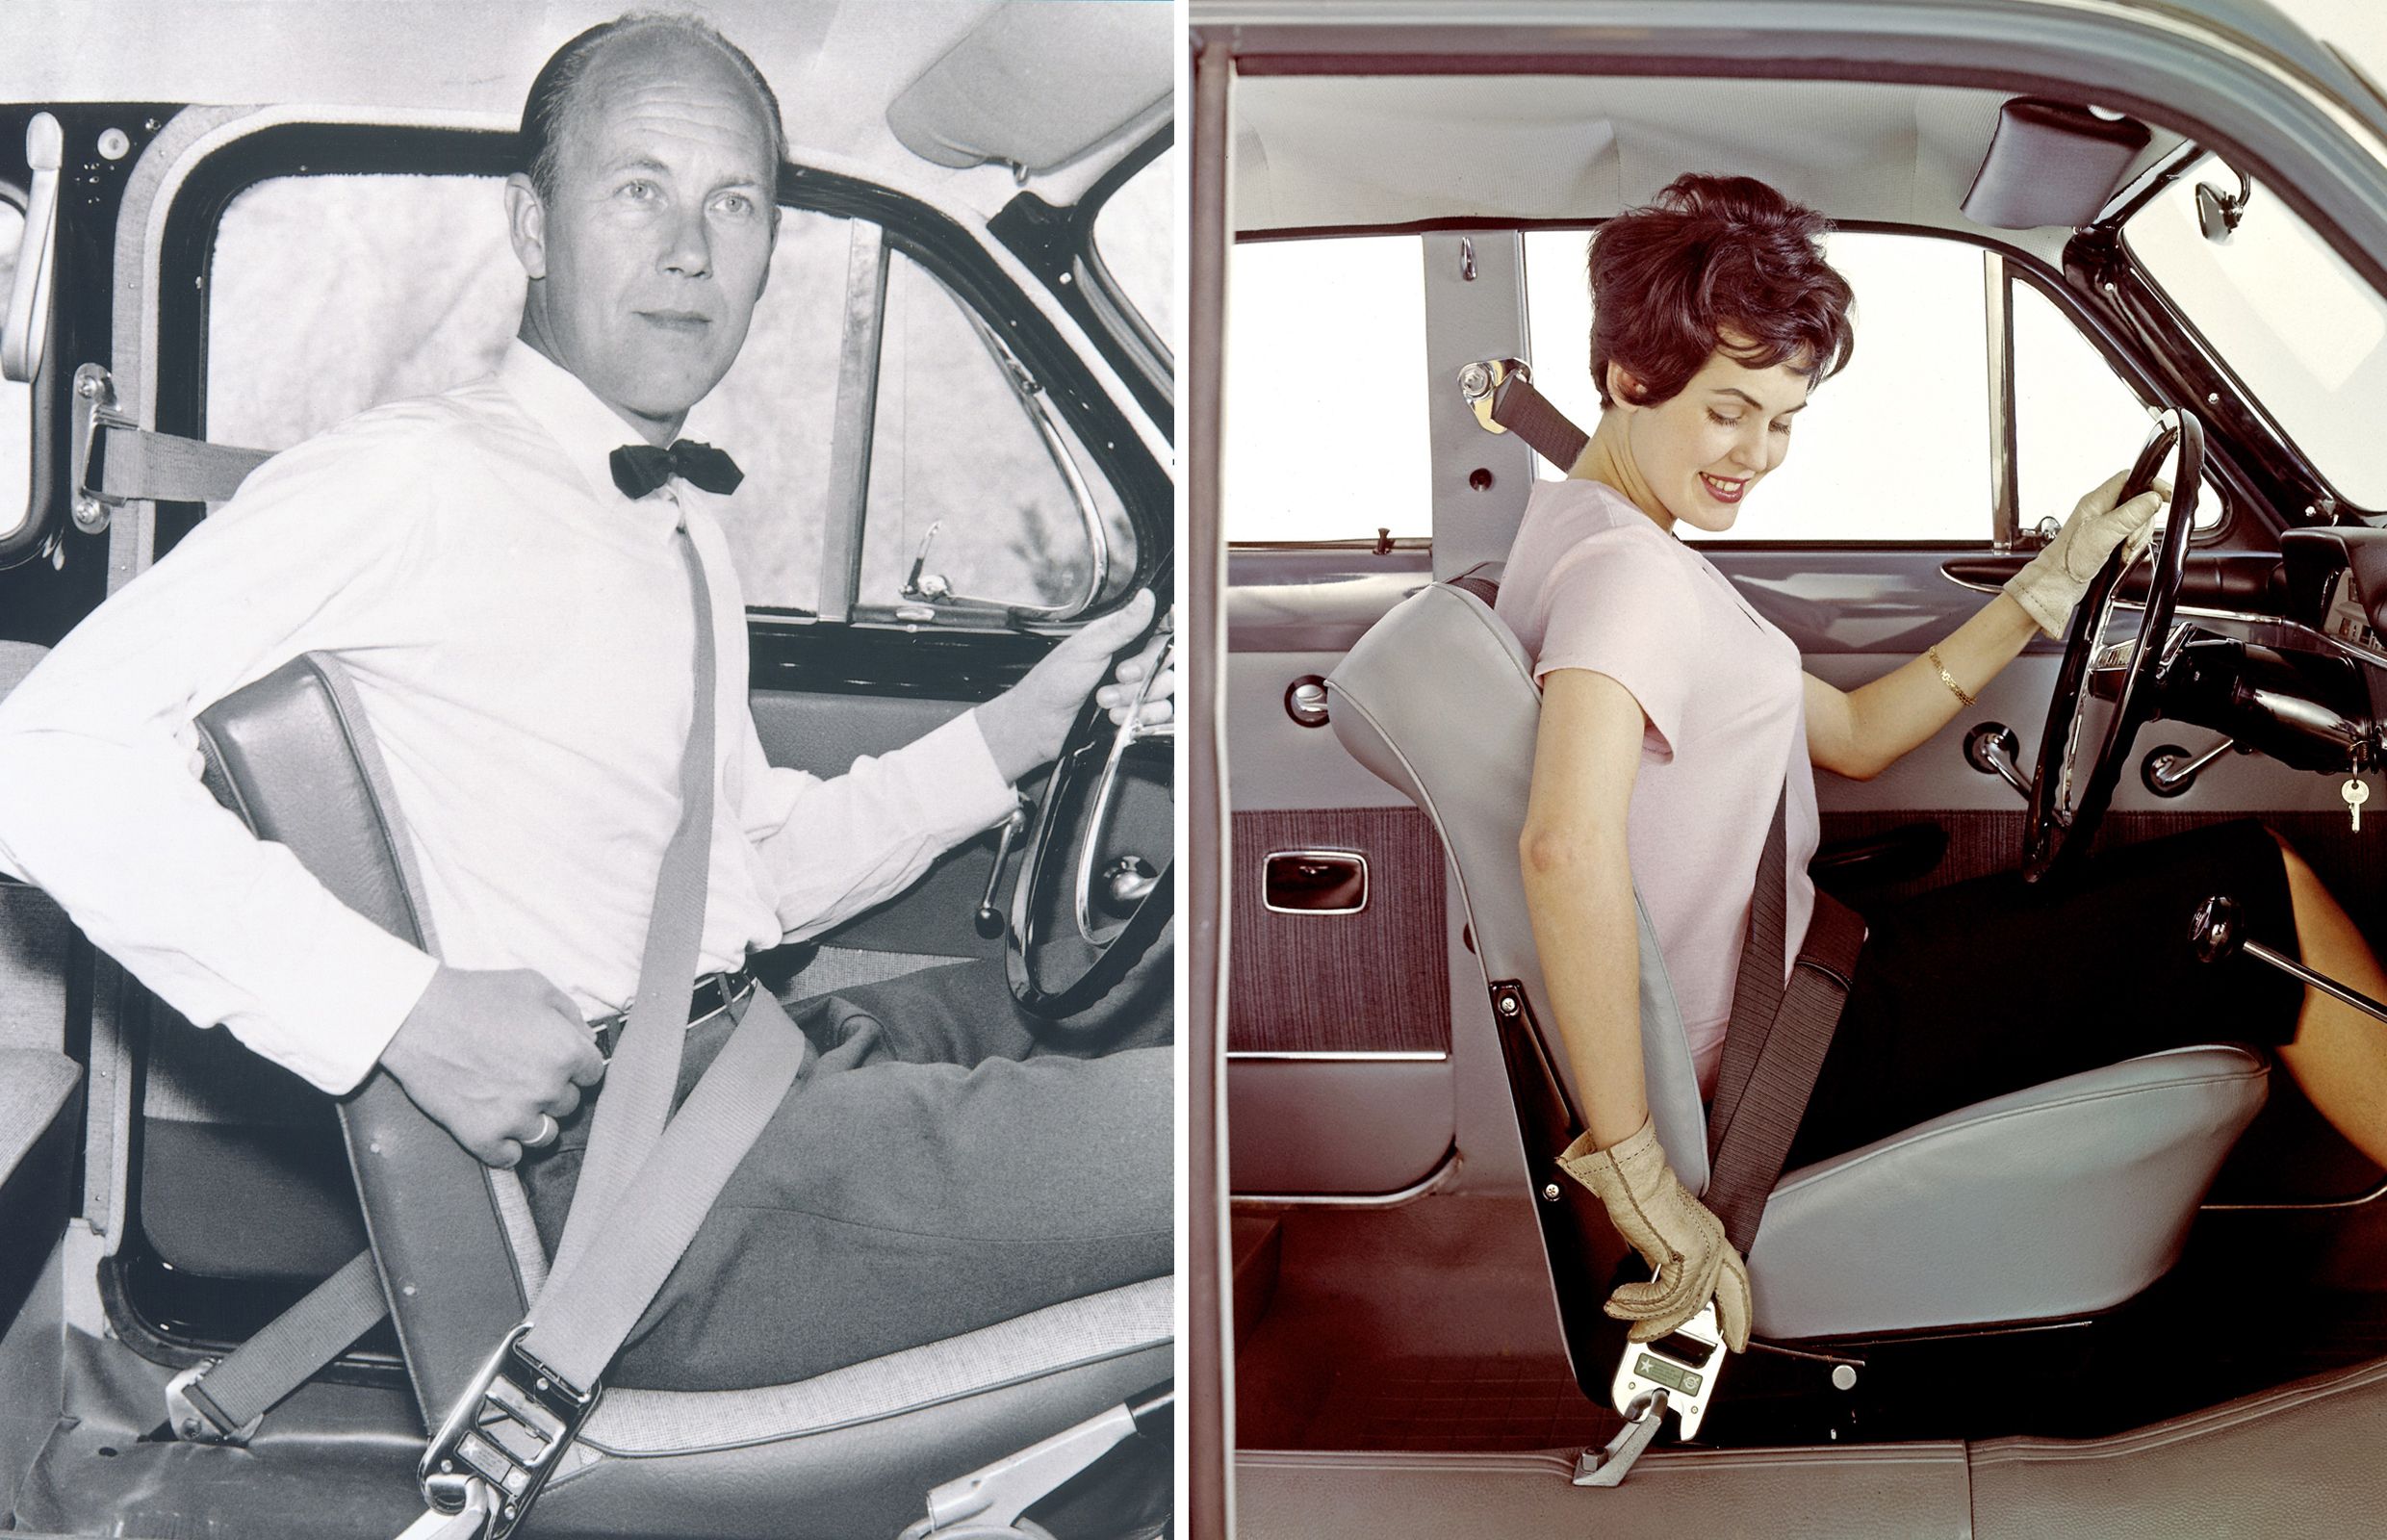 A not-so-brief history of the seatbelt